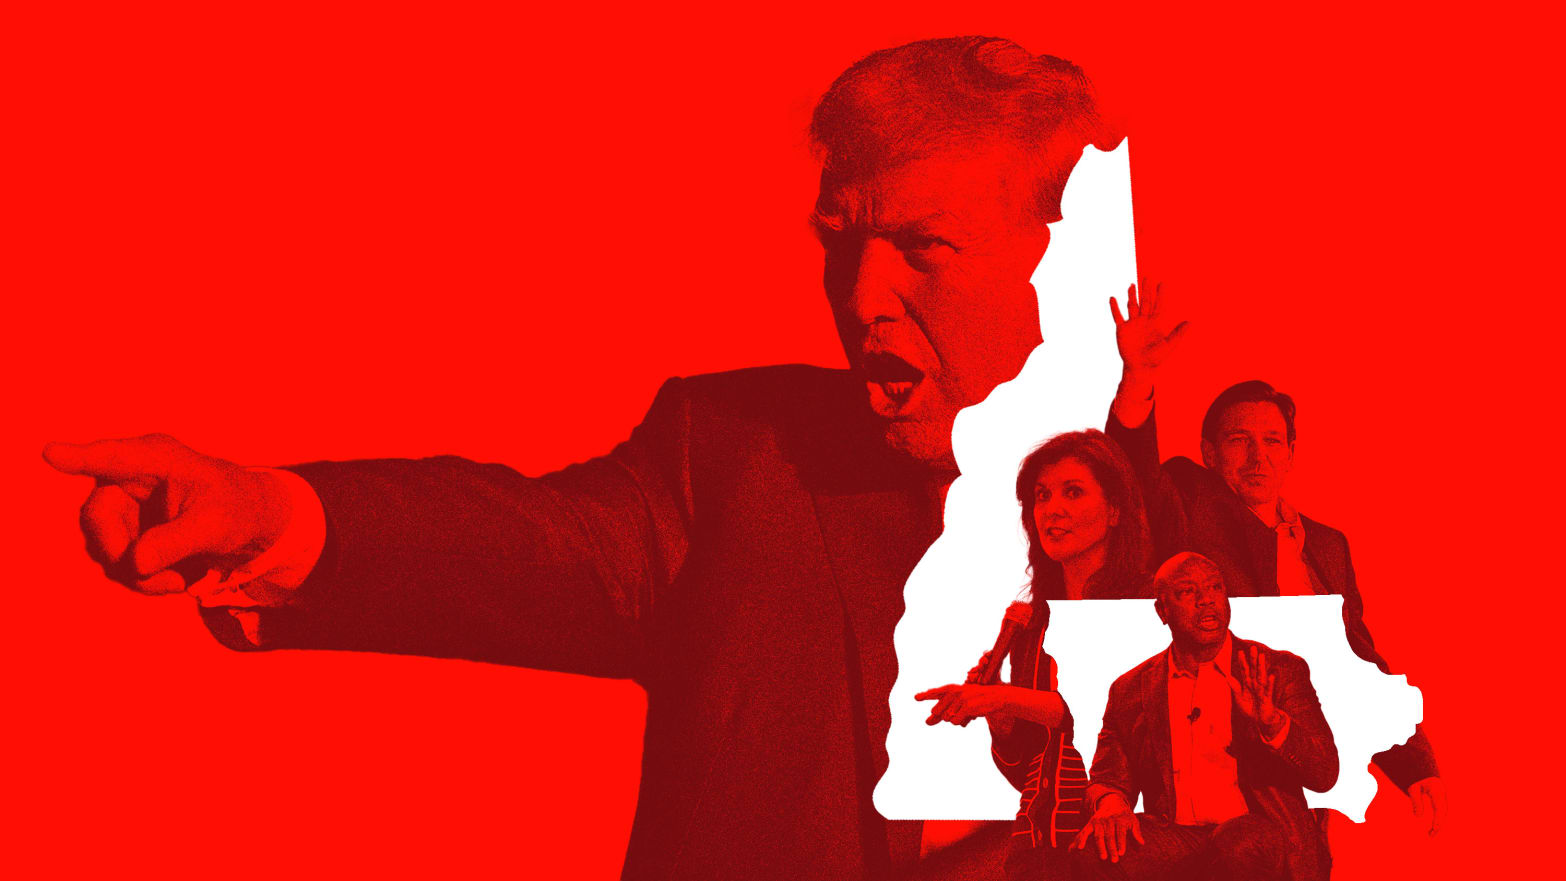 A photo illustration that shows Donald Trump angry pointing out in front of the outline of Iowa and New Hampshire